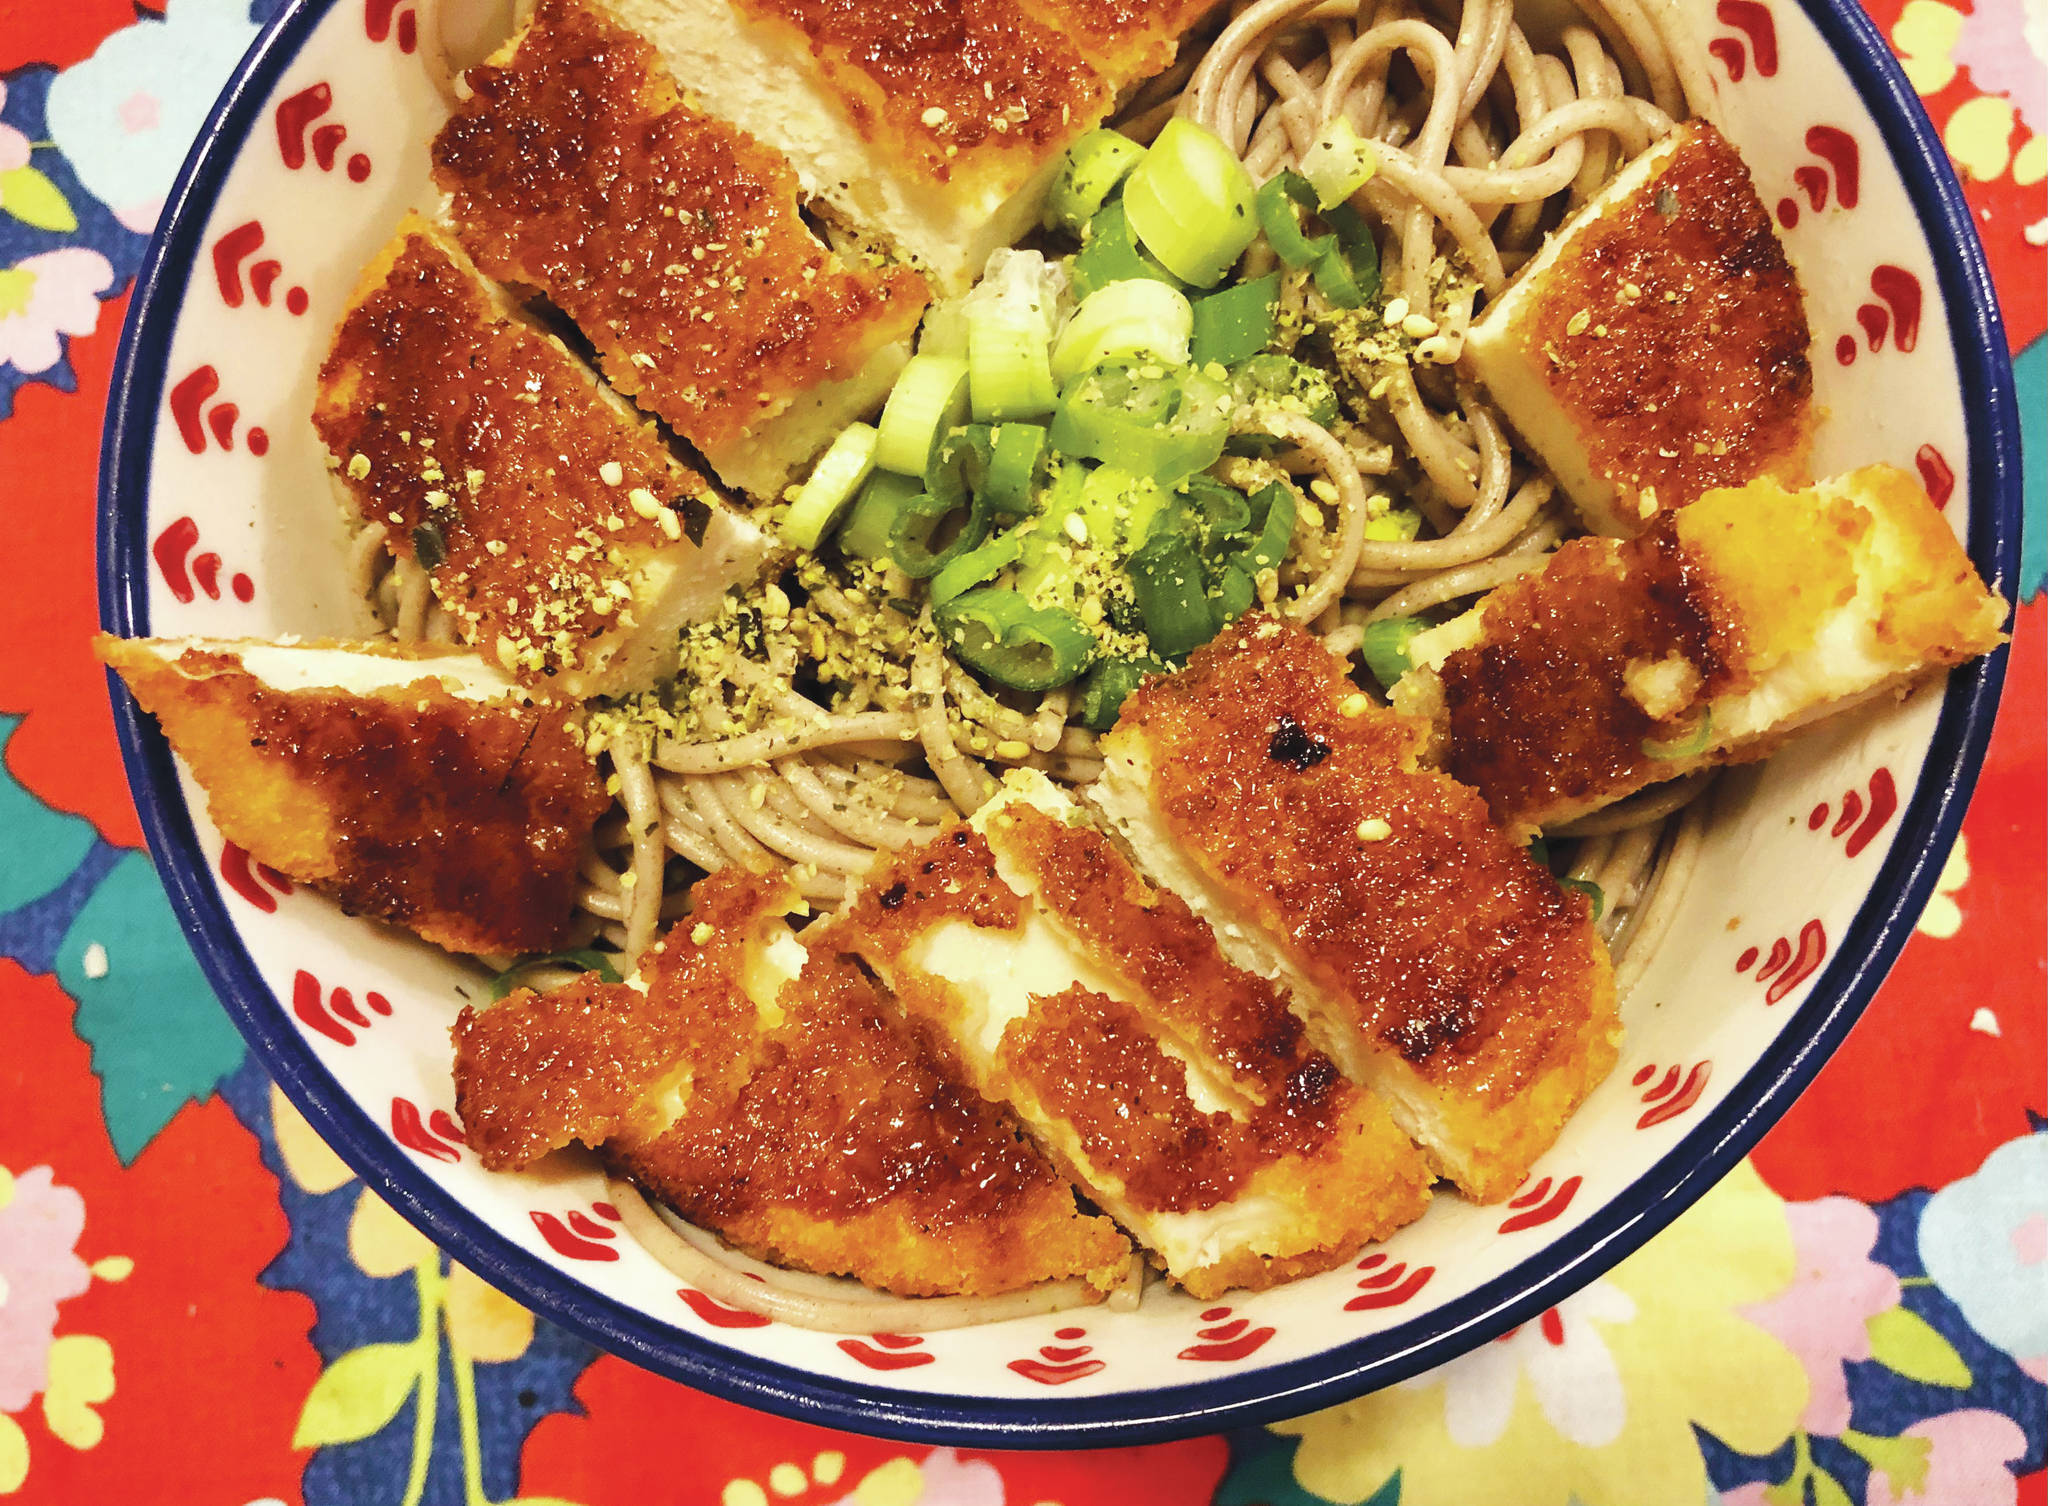 A chicken patty adds to a simple Japanese-cuisine-inspired noodle bowl, photographed on Jan. 15, 2021, in Anchorage, Alaska. (Photo by Victoria Petersen/Peninsula Clarion)